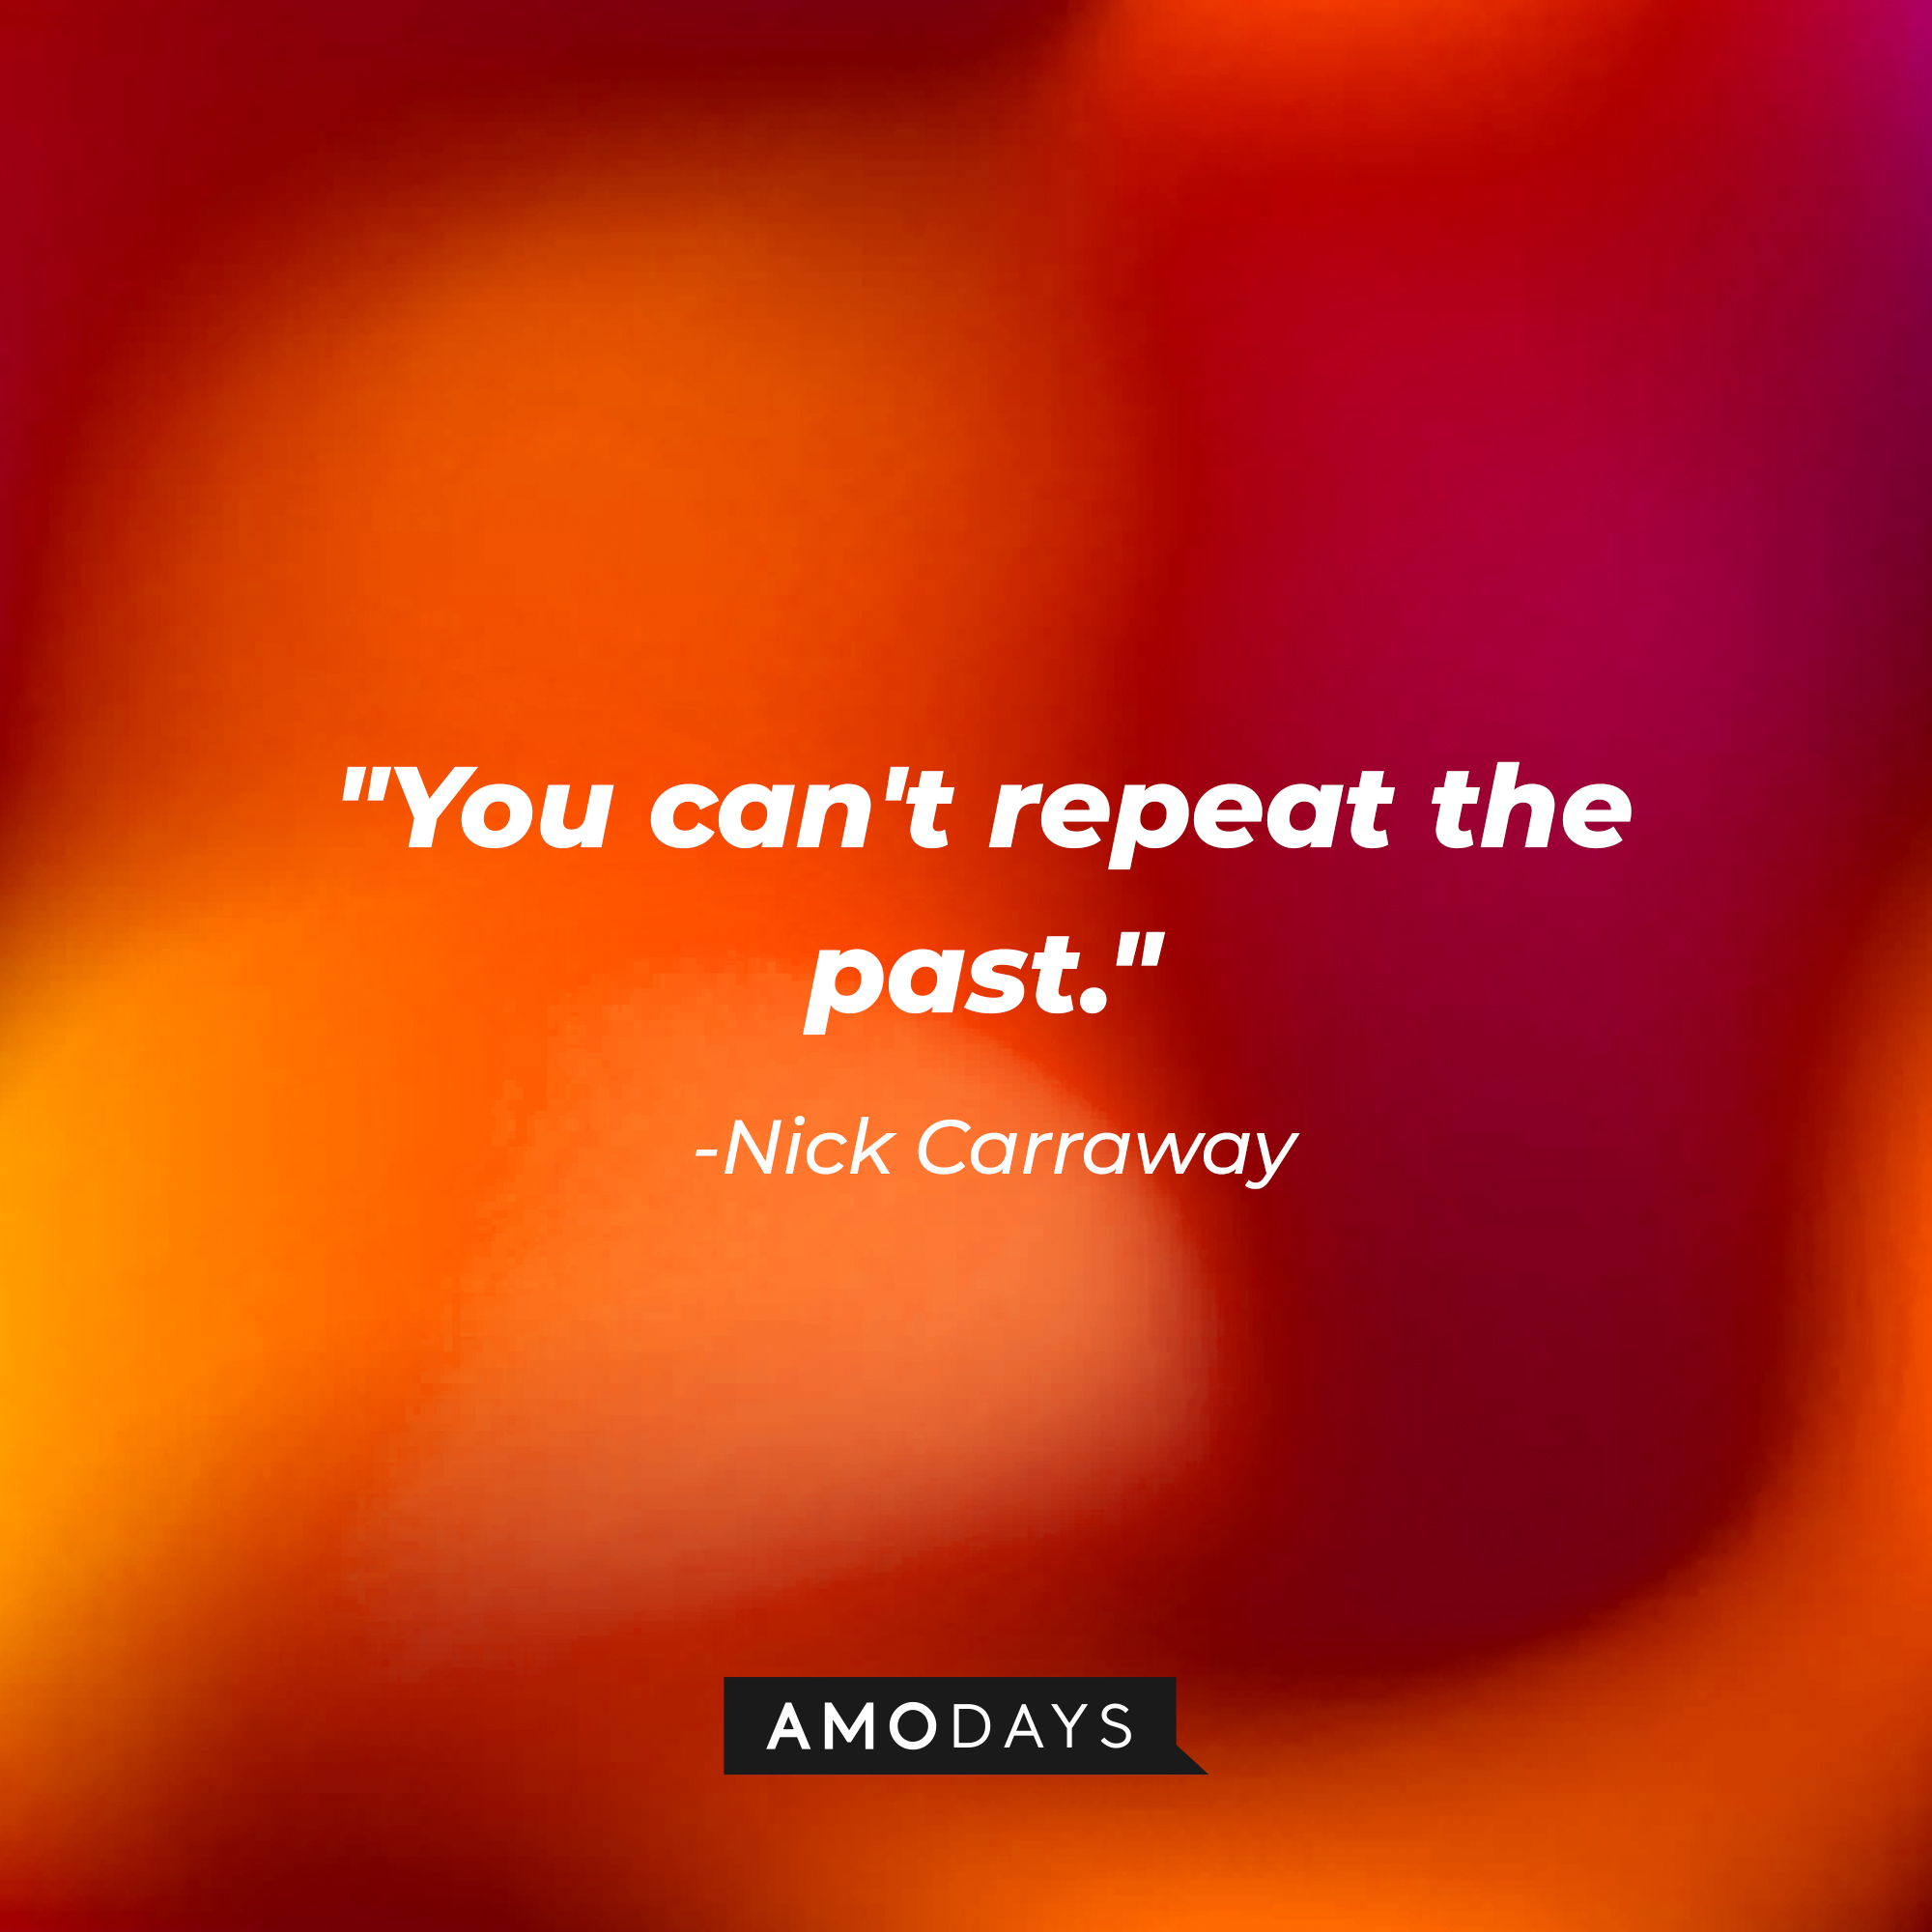 Nick Carraway's quote, "You can't repeat the past."  | Source: Amodays